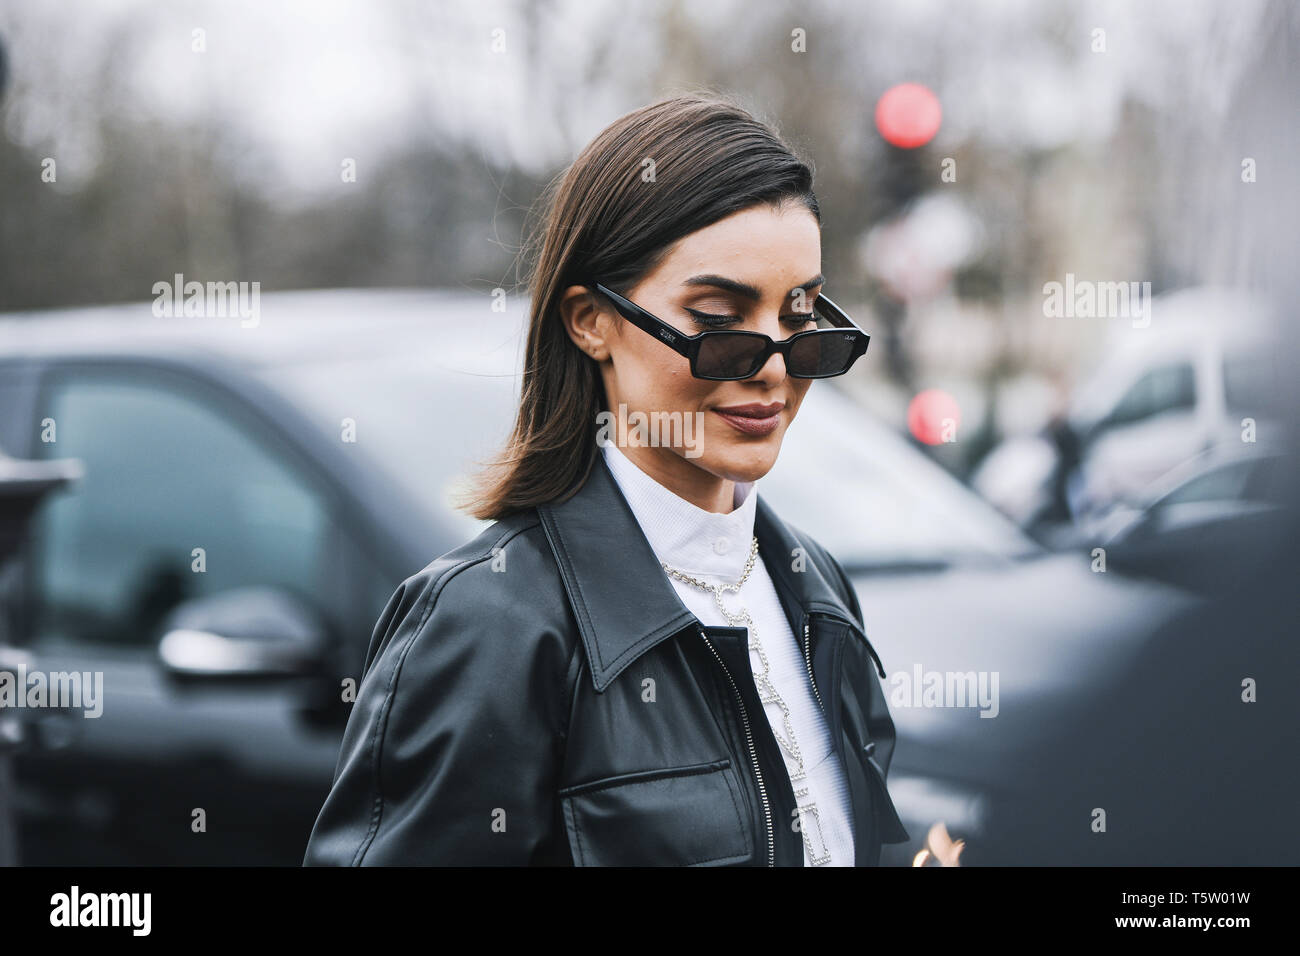 Paris, France - March 5, 2019: Street Style Outfit - Camila Coelho Before A  Fashion Show During Paris Fashion Week - PFWFW19 Stock Photo, Picture and  Royalty Free Image. Image 134700144.